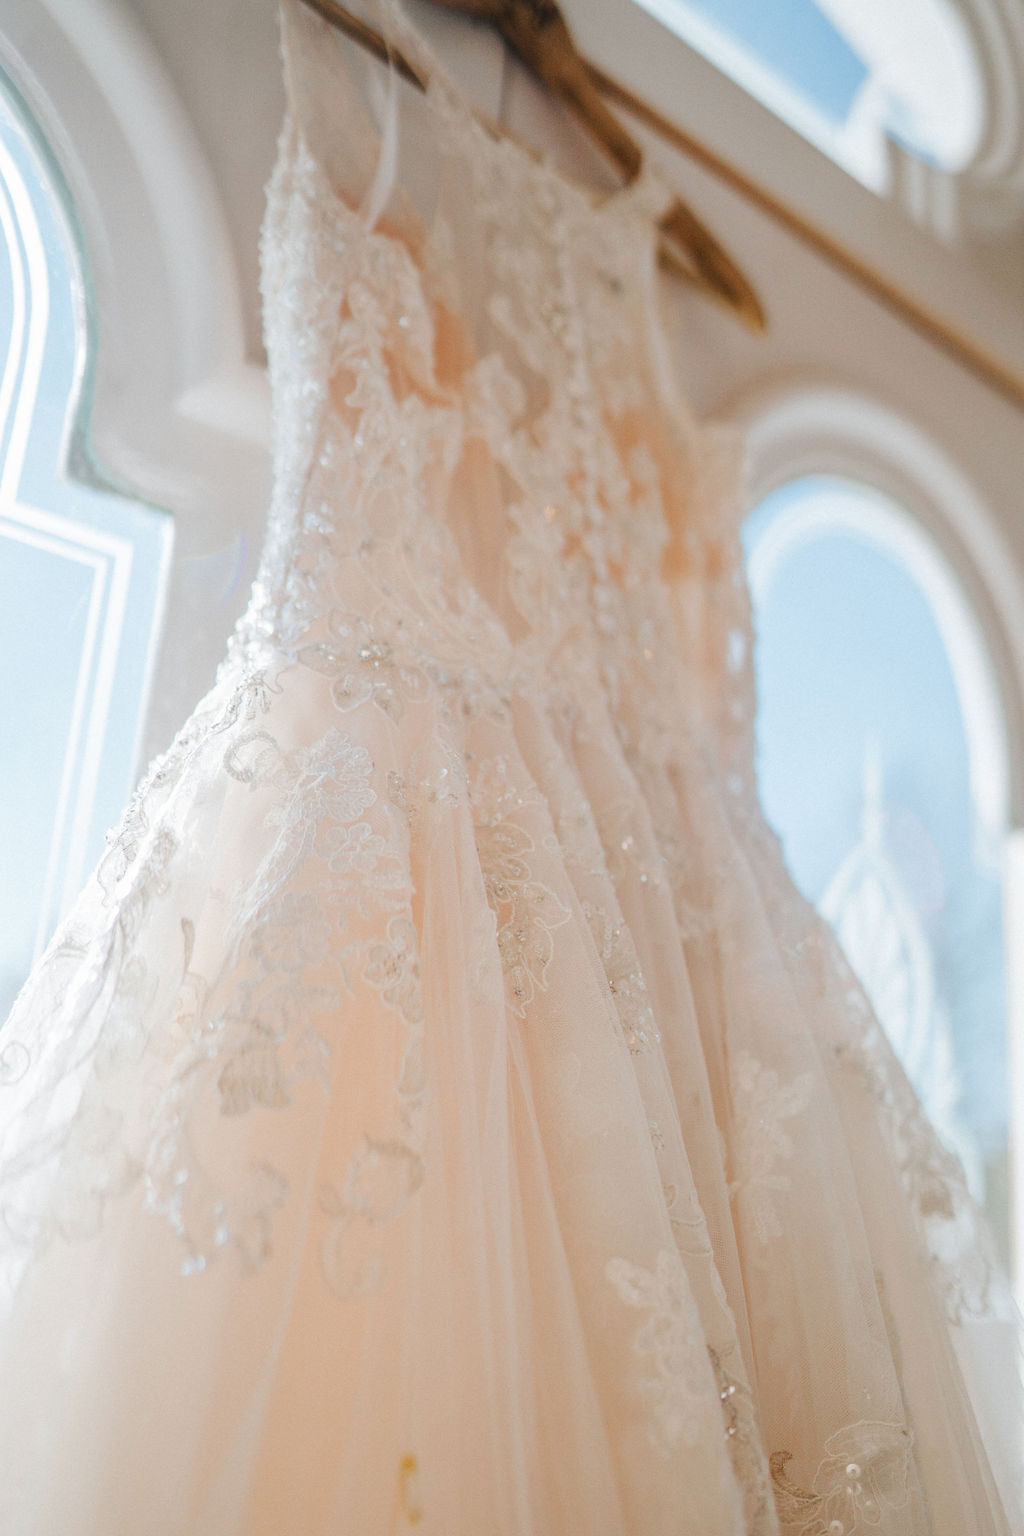 Detailed picture of wedding dress that is hanging from a door